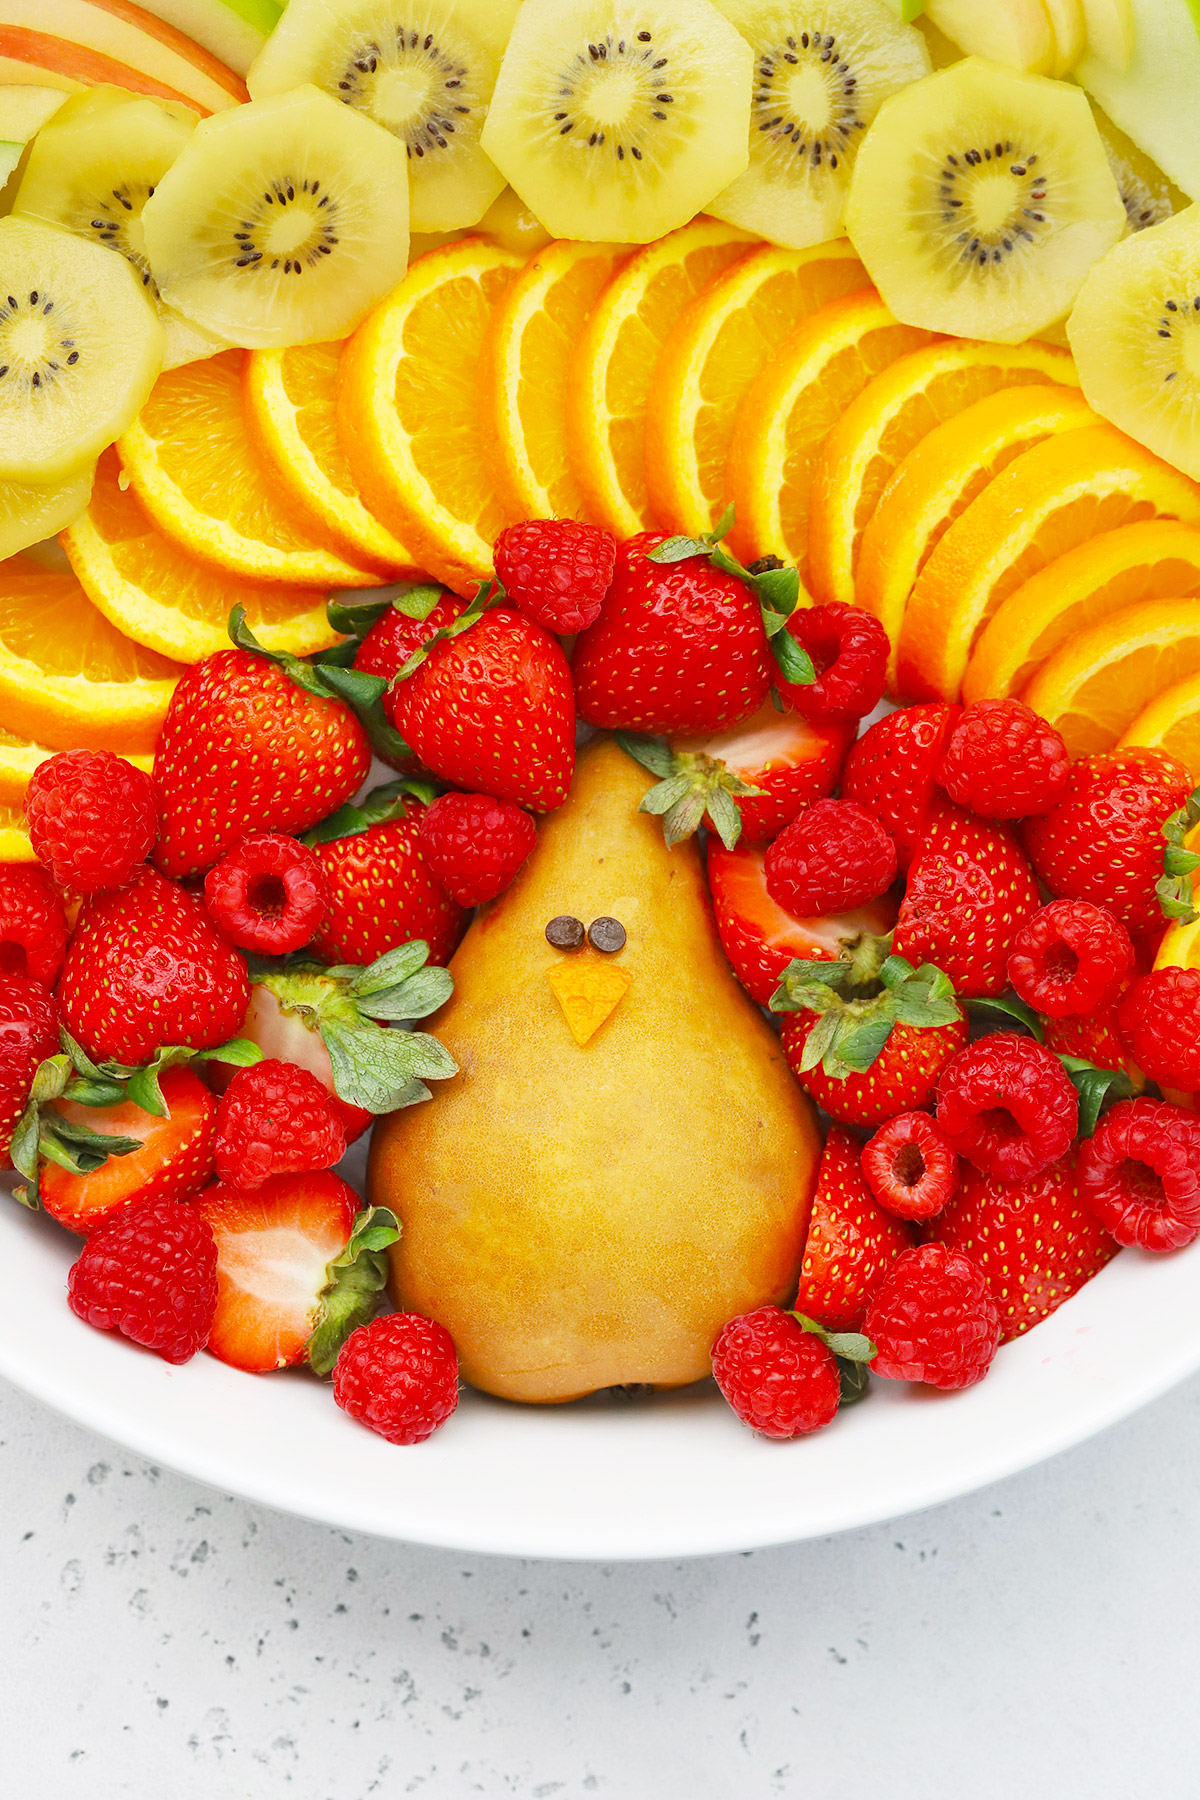 Overhead view of Thanksgiving Fruit Plate shaped like a turkey with text overlay that reads "Cute + Easy Thanksgiving Turkey Fruit Plate: Simple + Fun + Adorable!"